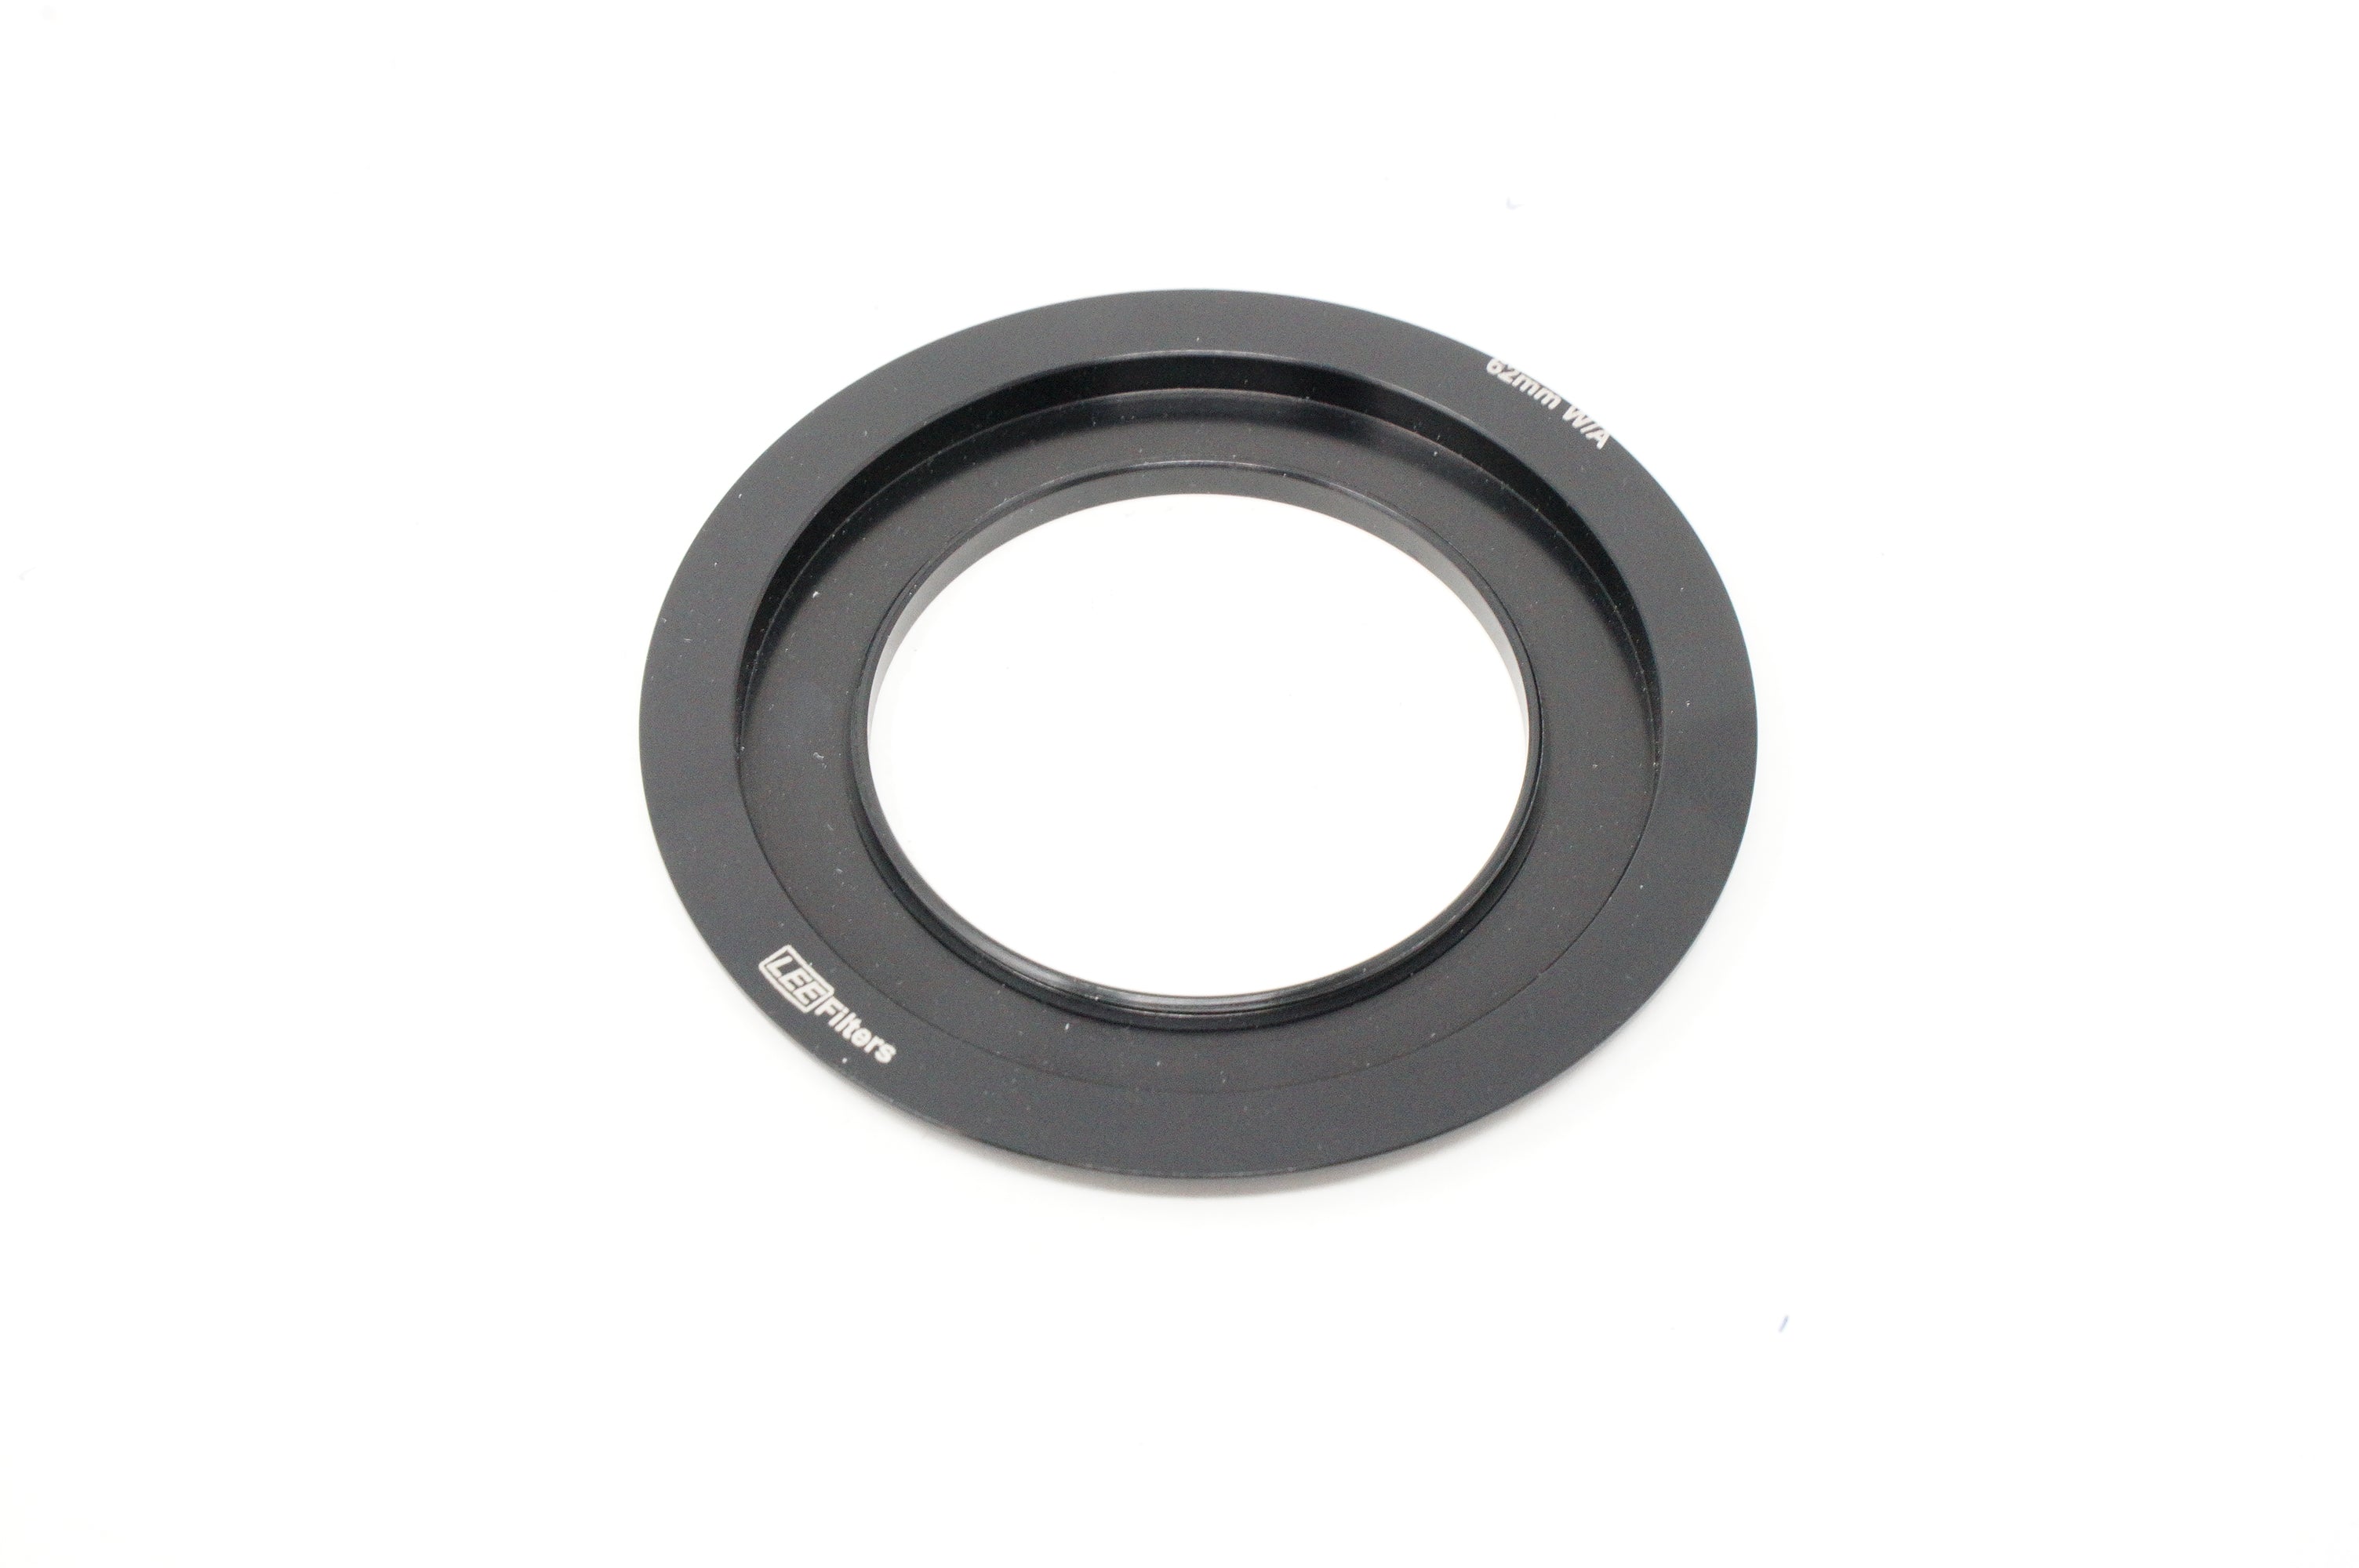 Used Lee Filters W/A wide angle 100mm adaptor ring 62mm (Boxed SH38770)